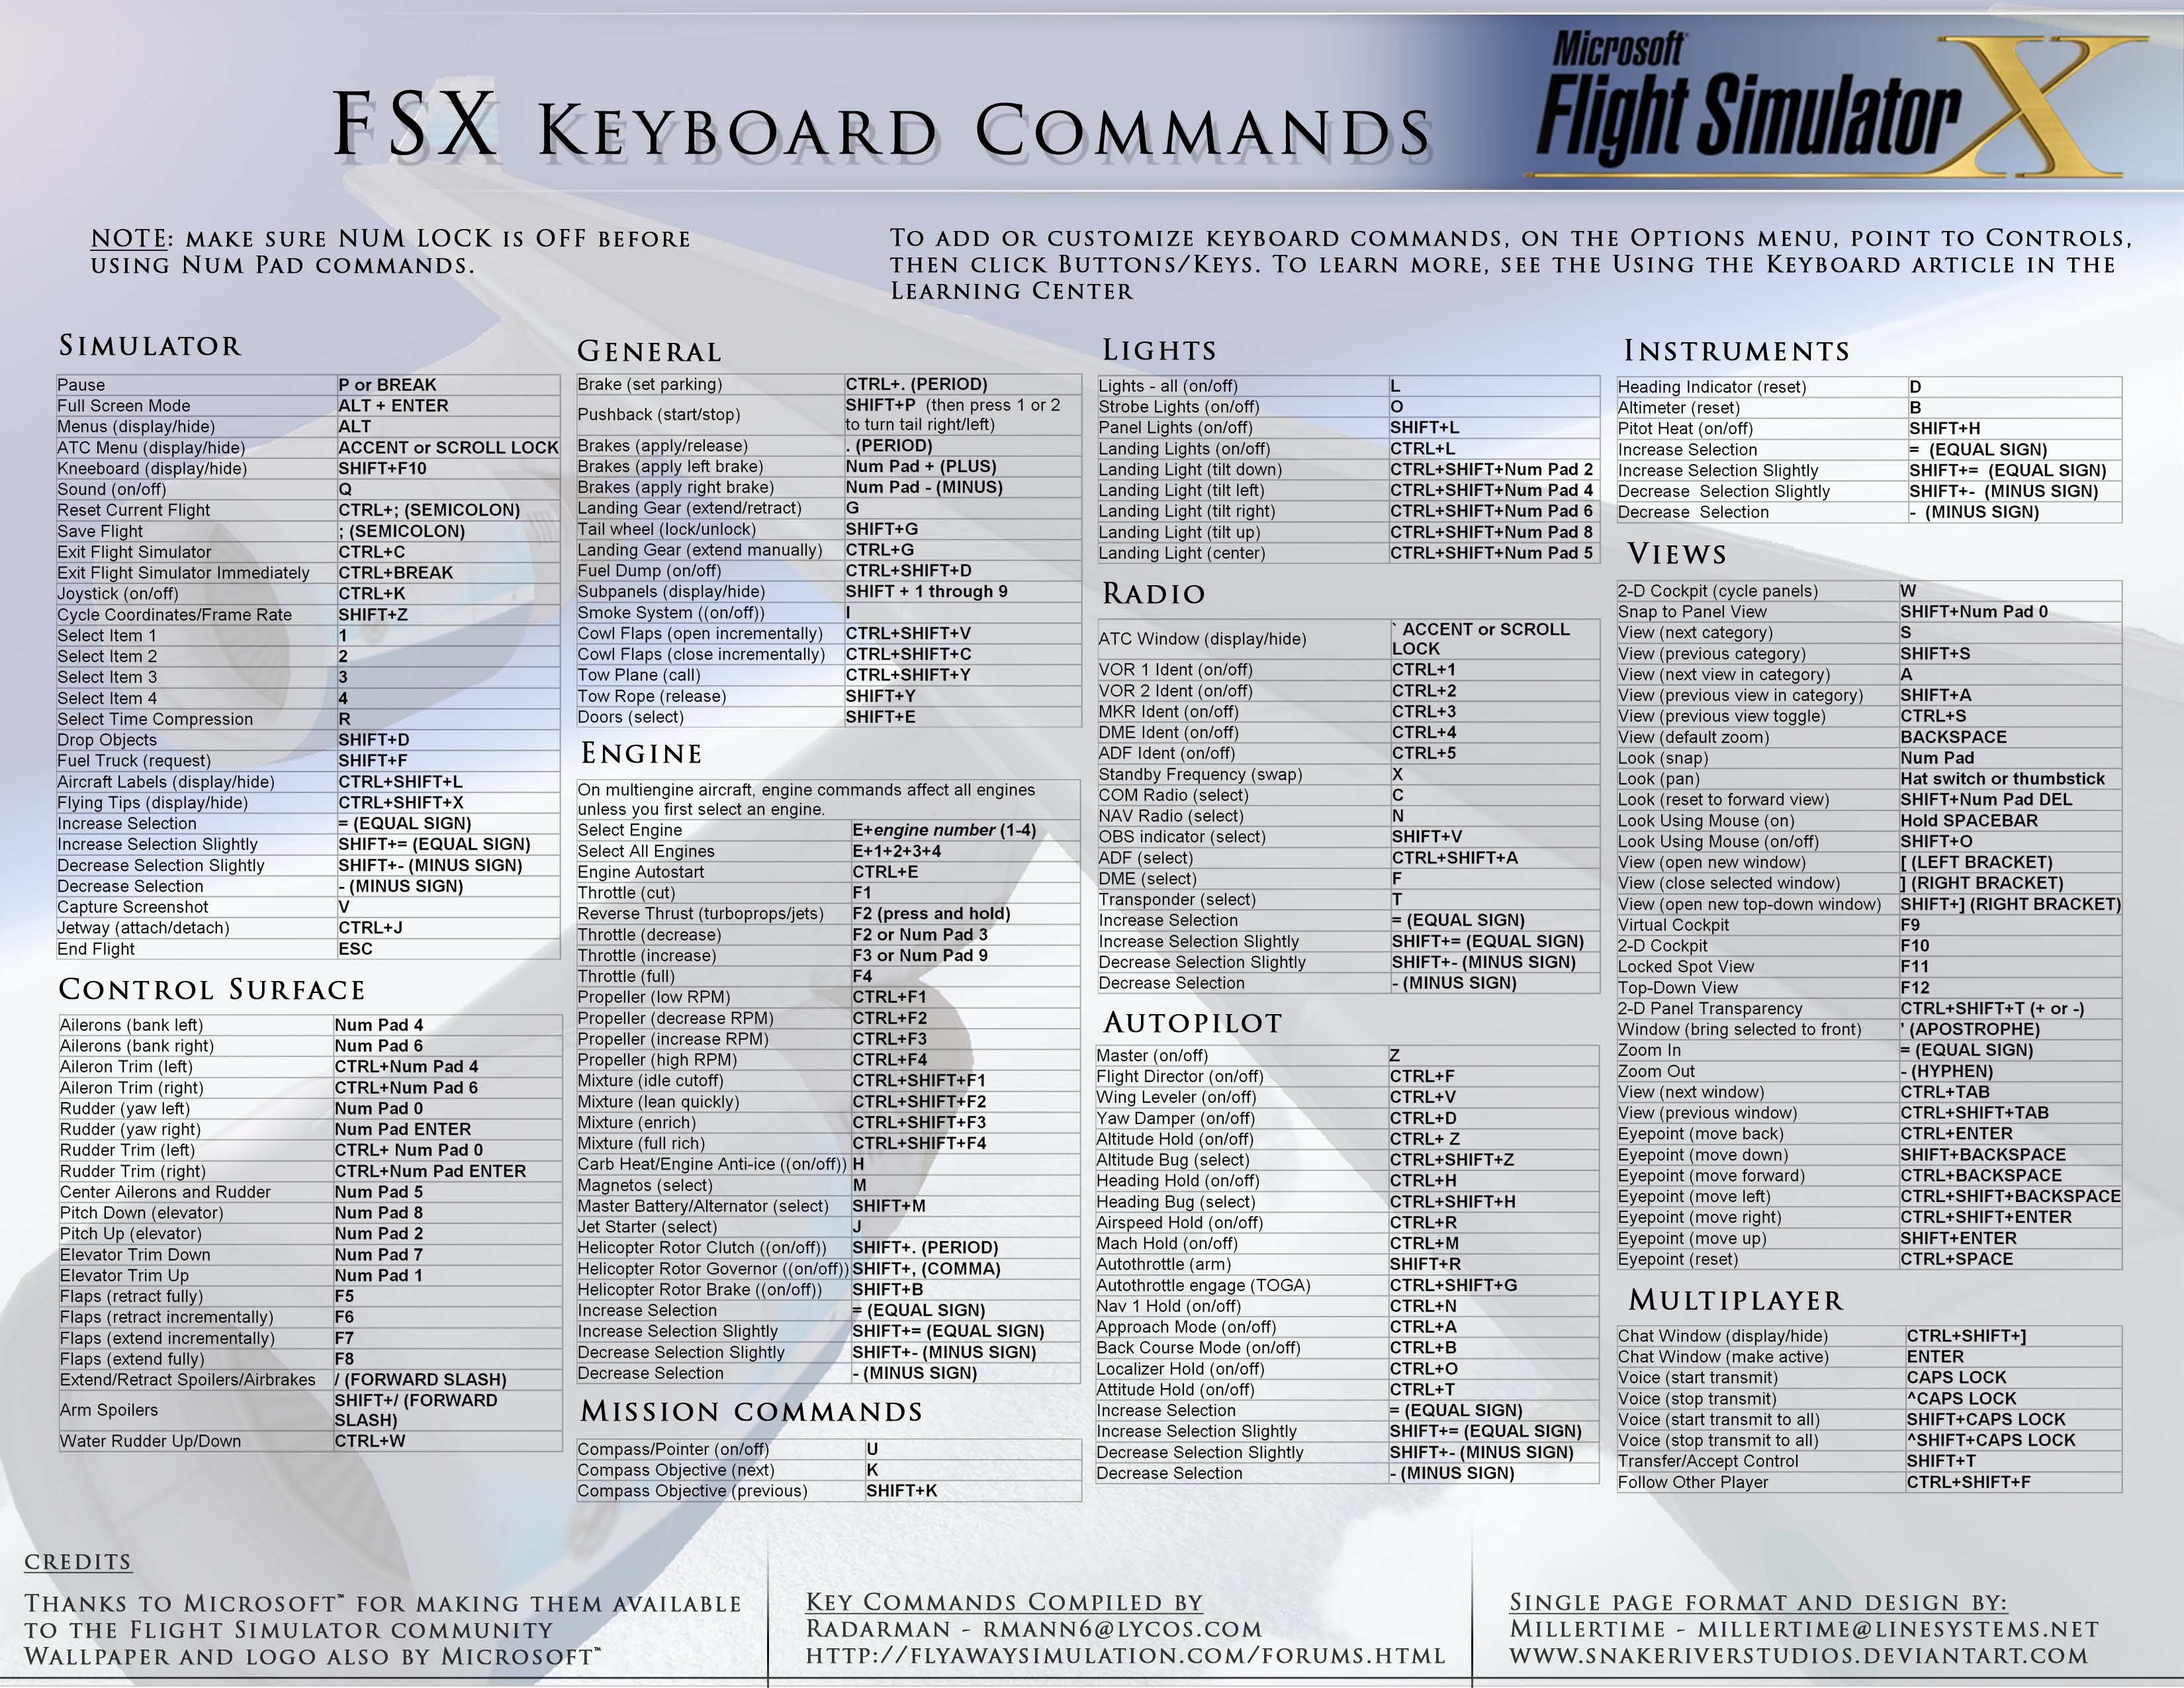 Key Commands Pamphlet For FSX